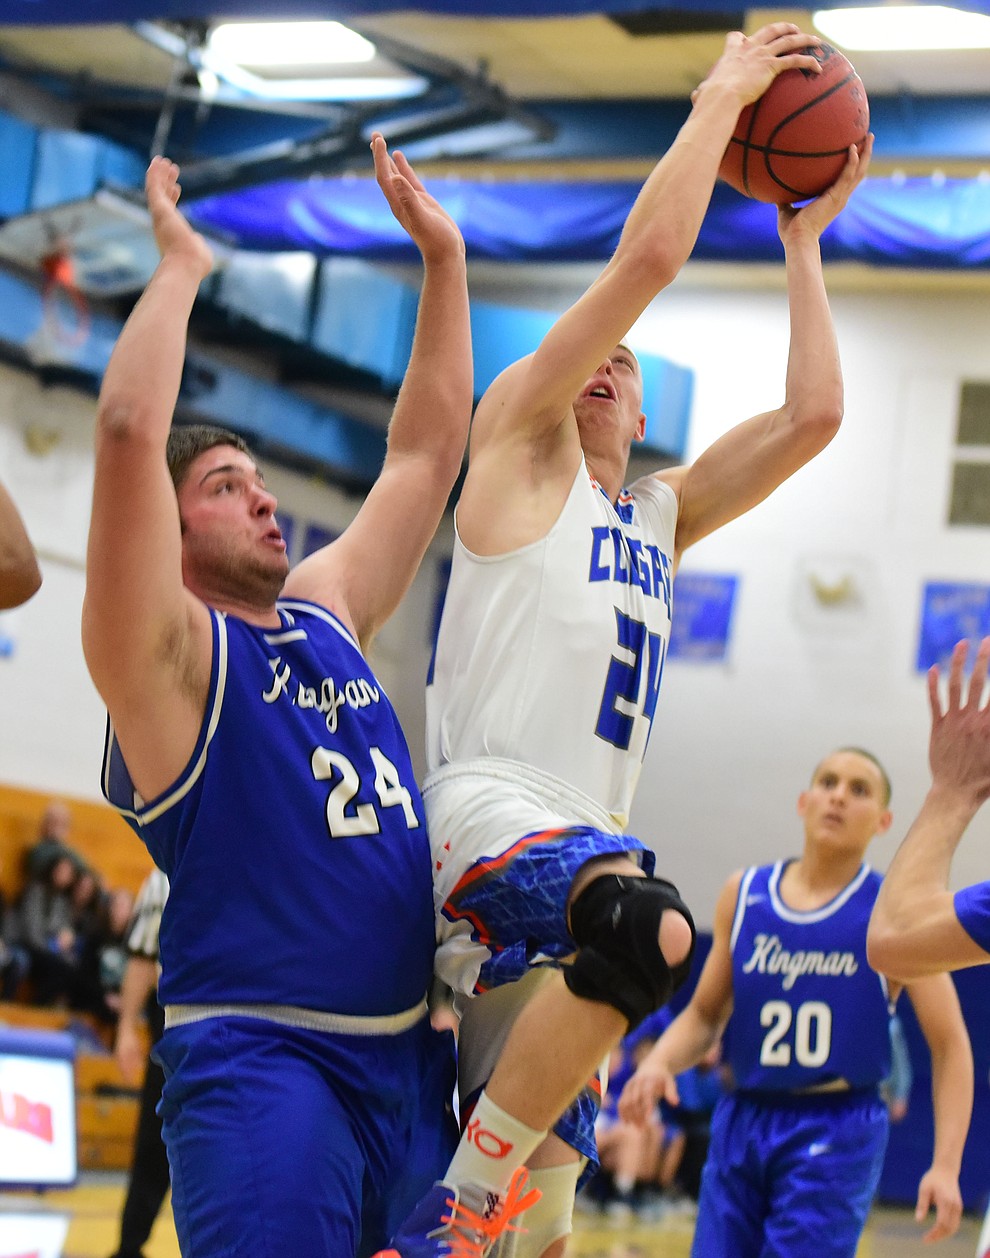 Chino Valley's Brian Sutton goes into the lane hard as the Cougars take on the Kingman Bulldogs Tuesday, January 10 in Chino Vallley. (Les Stukenberg/The Daily Courier)